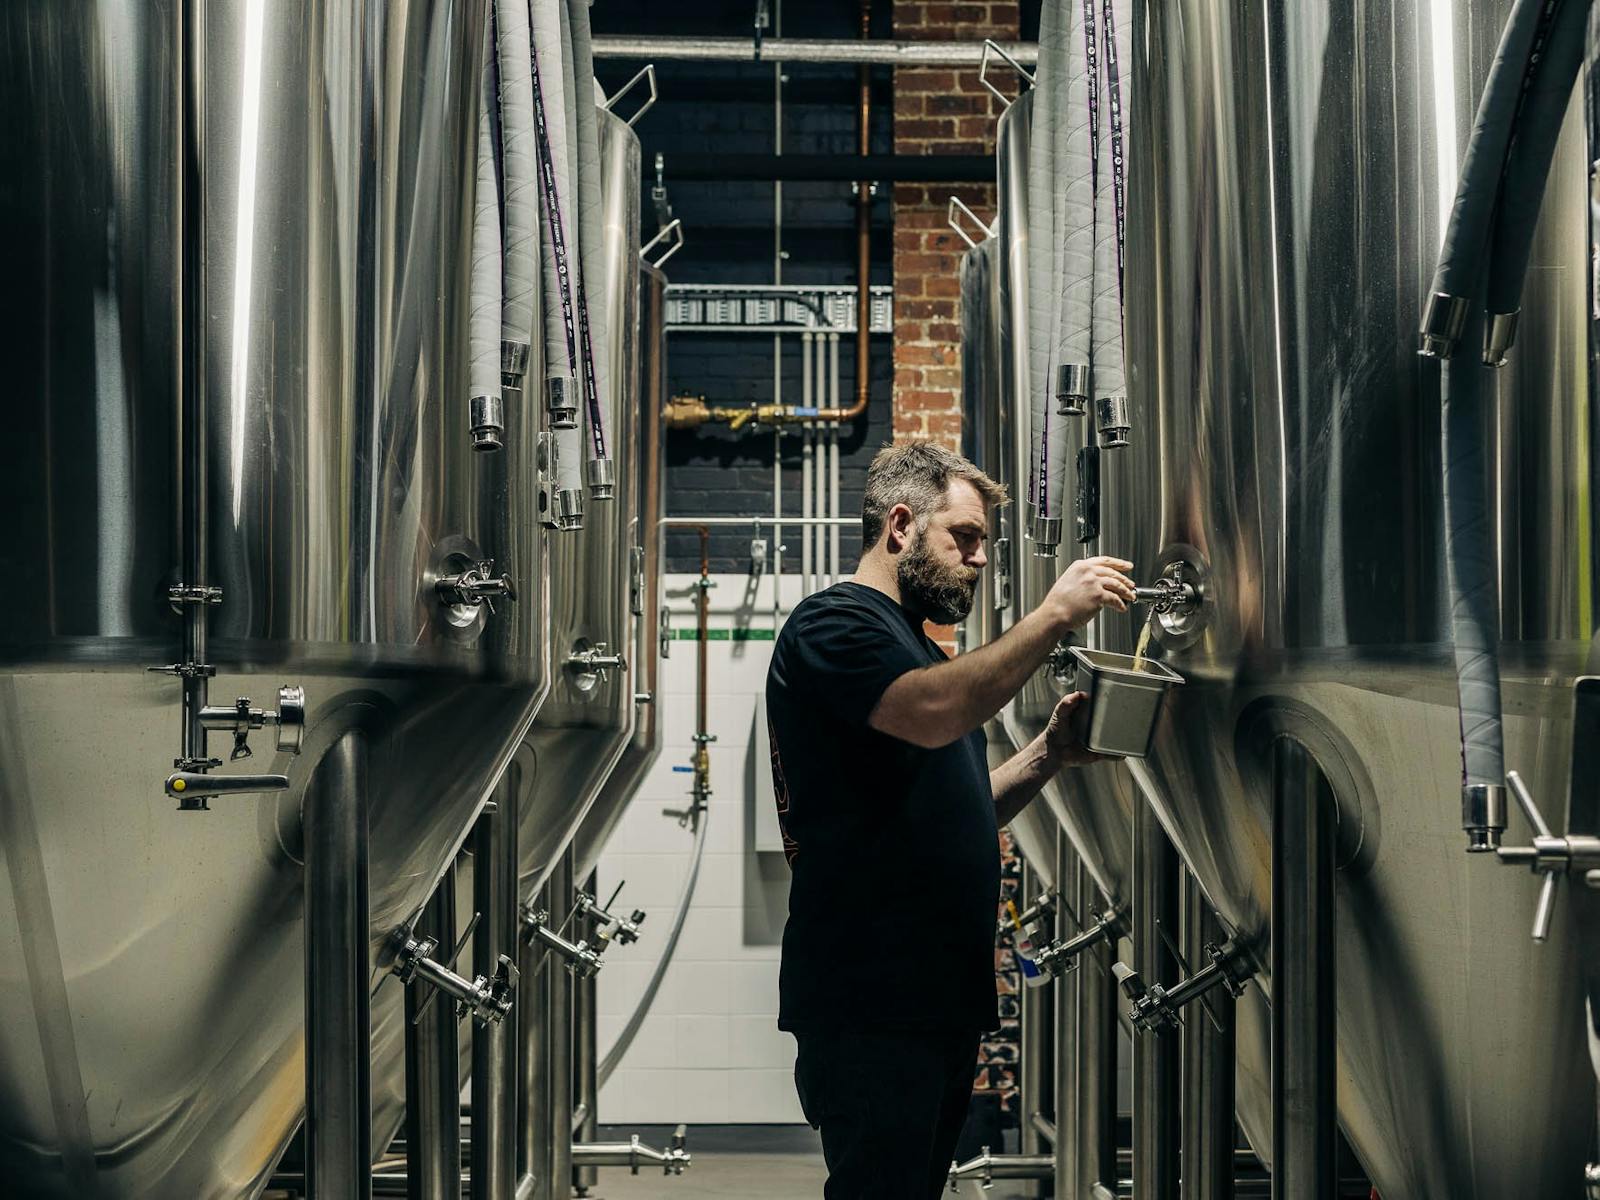 Dave, the head brewer hard at work in the brewery